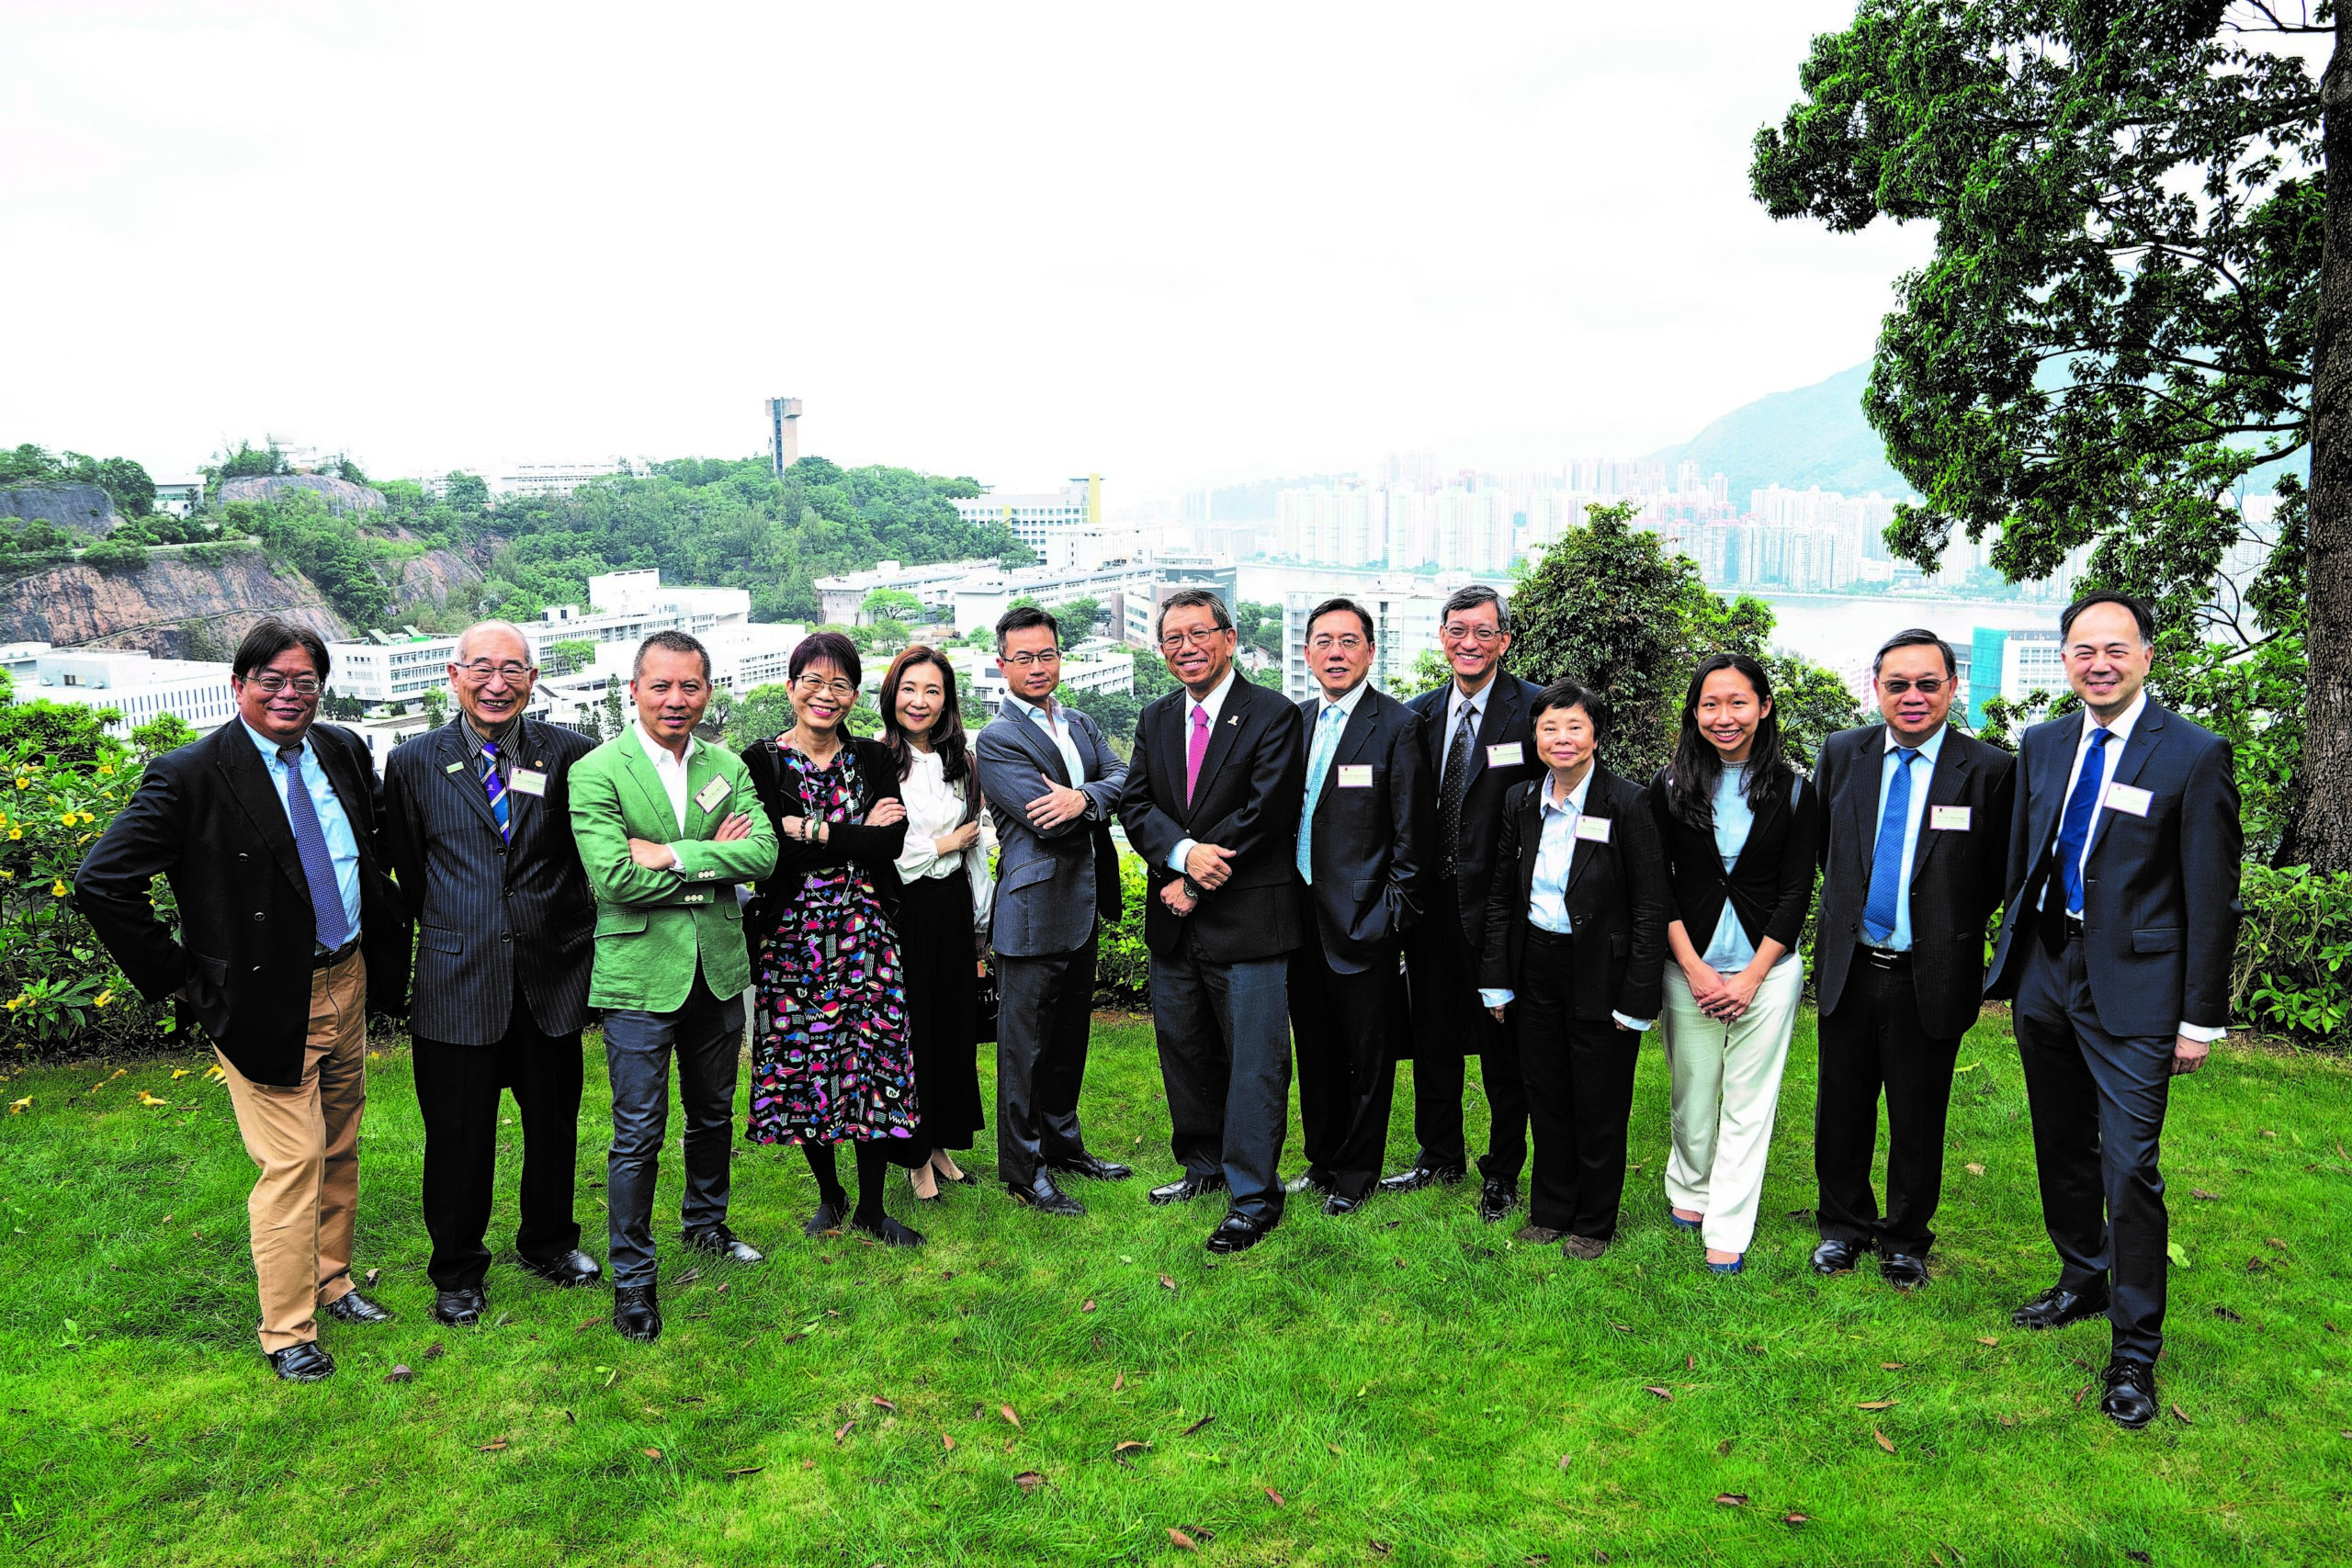 When CUHK launched the Global Alumni Advisory Board in 2018, Peter Hung (6th from right) was one of 12 alumni appointed as members.